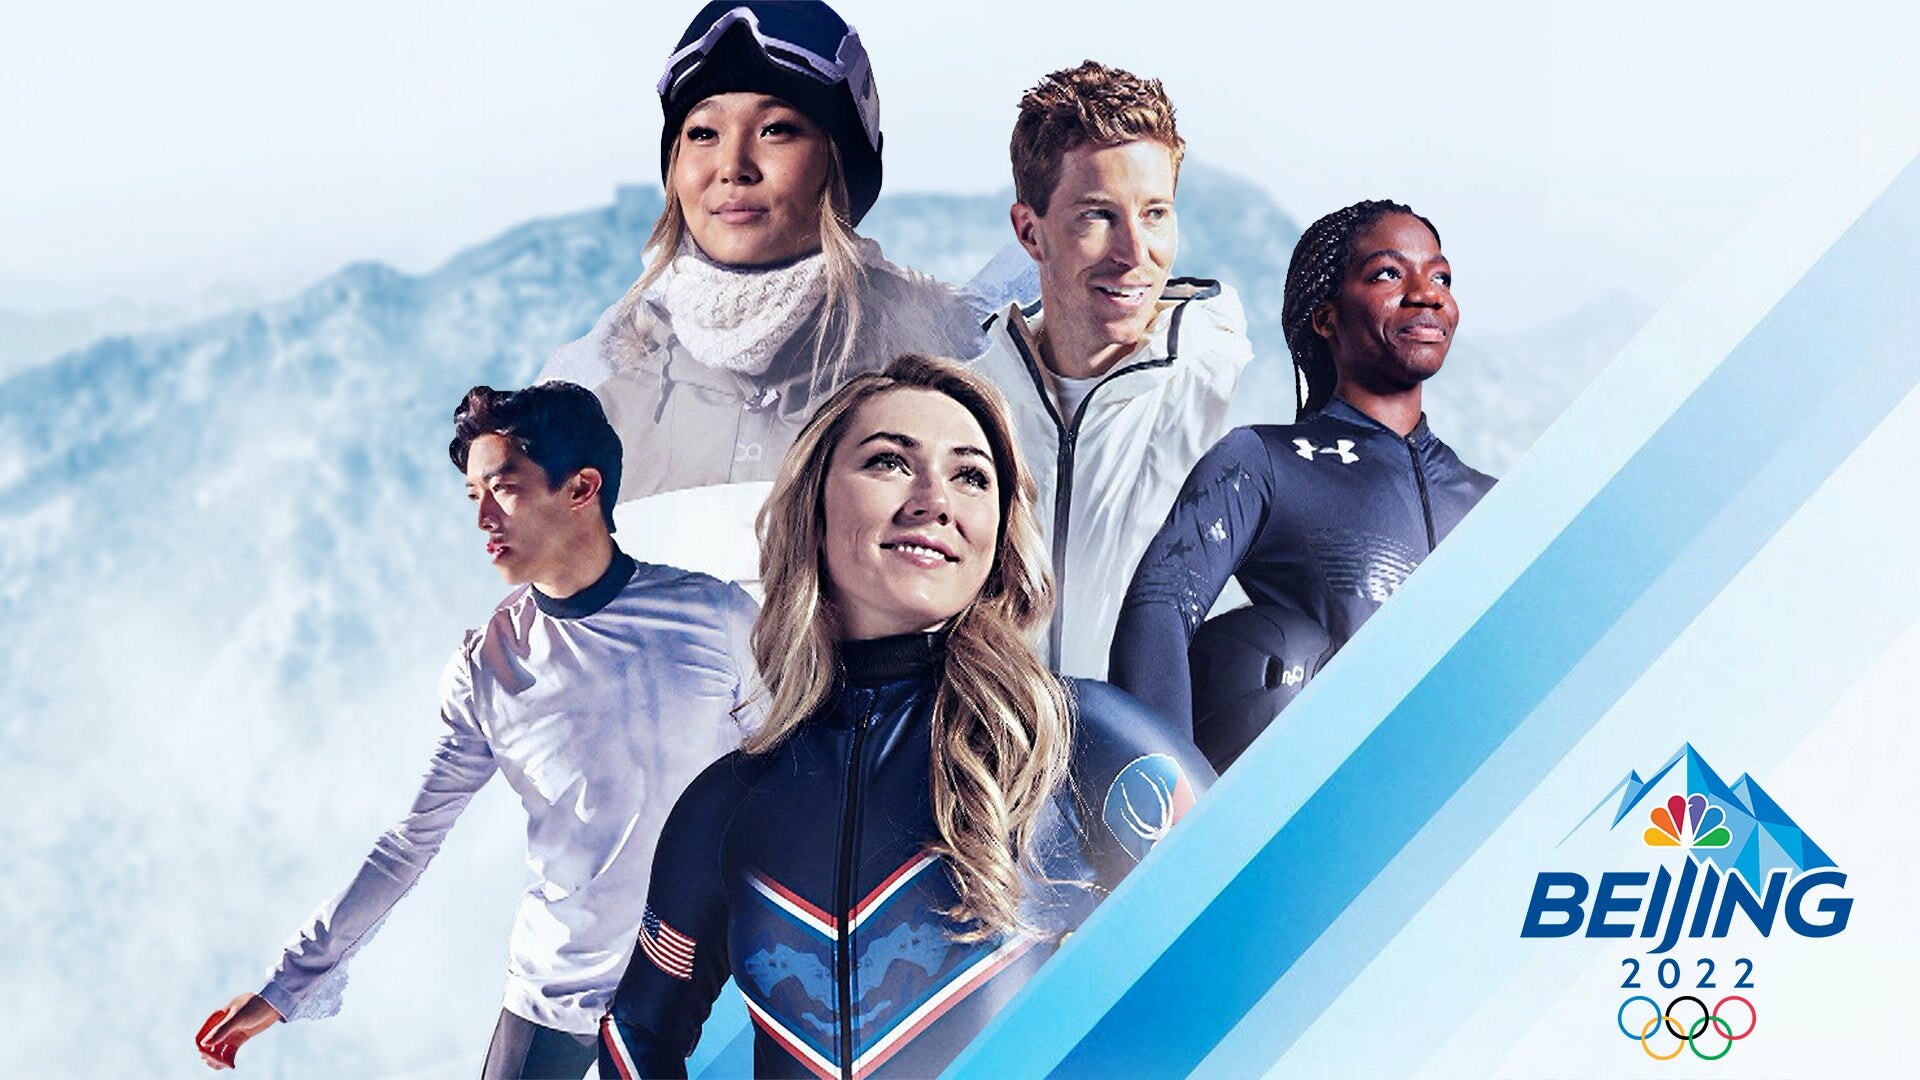 2022 Winter Olympics, Opening ceremony excitement, Live coverage schedule, Must-watch event, 1920x1080 Full HD Desktop